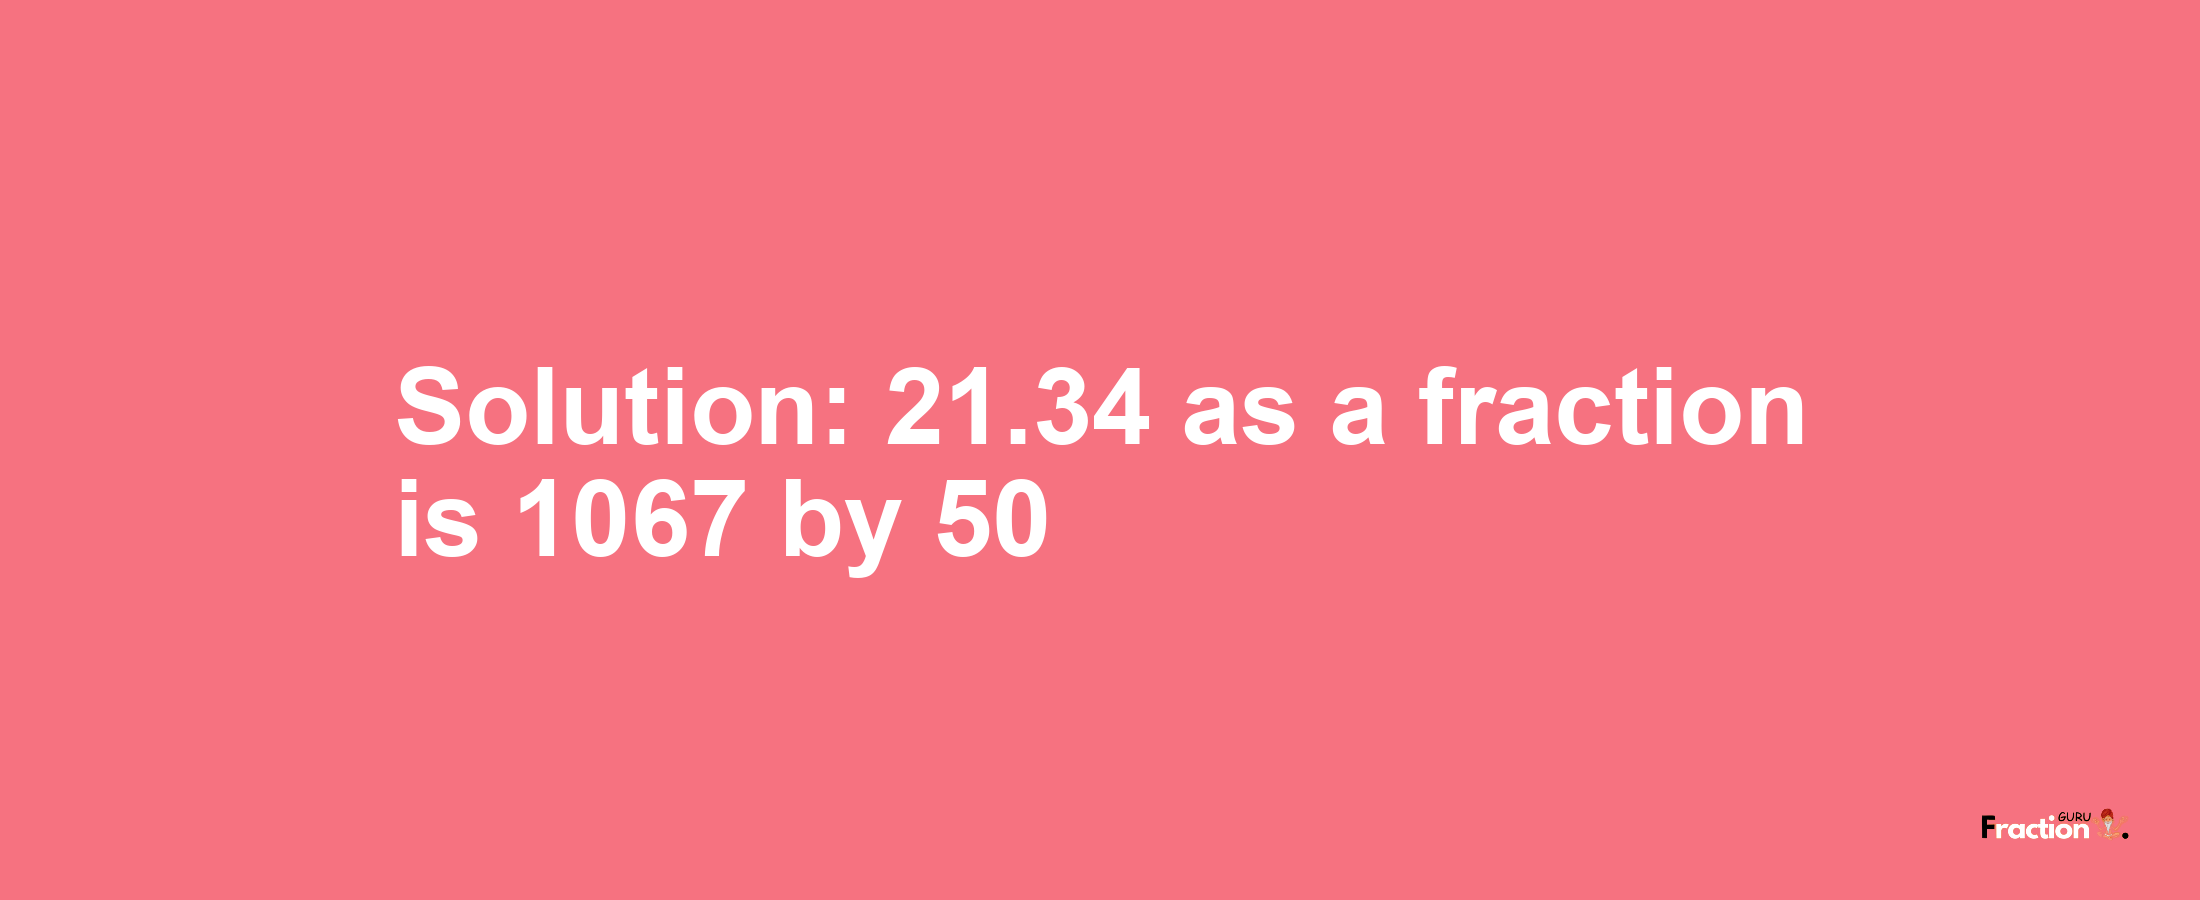 Solution:21.34 as a fraction is 1067/50